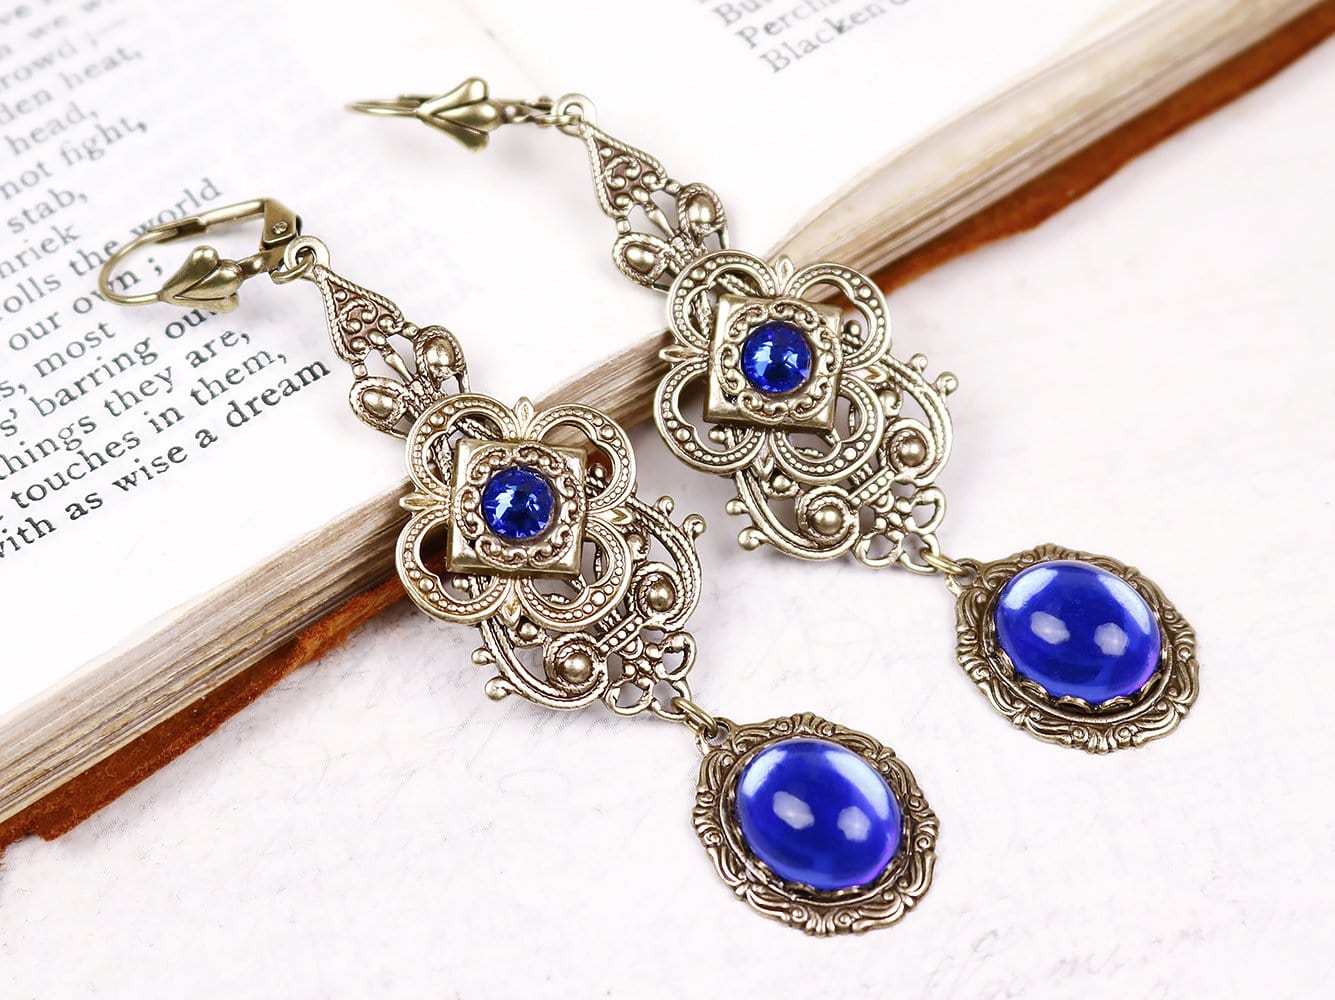 Avalon Earrings in Sapphire and Antiqued Brass by Rabbitwood & Reason